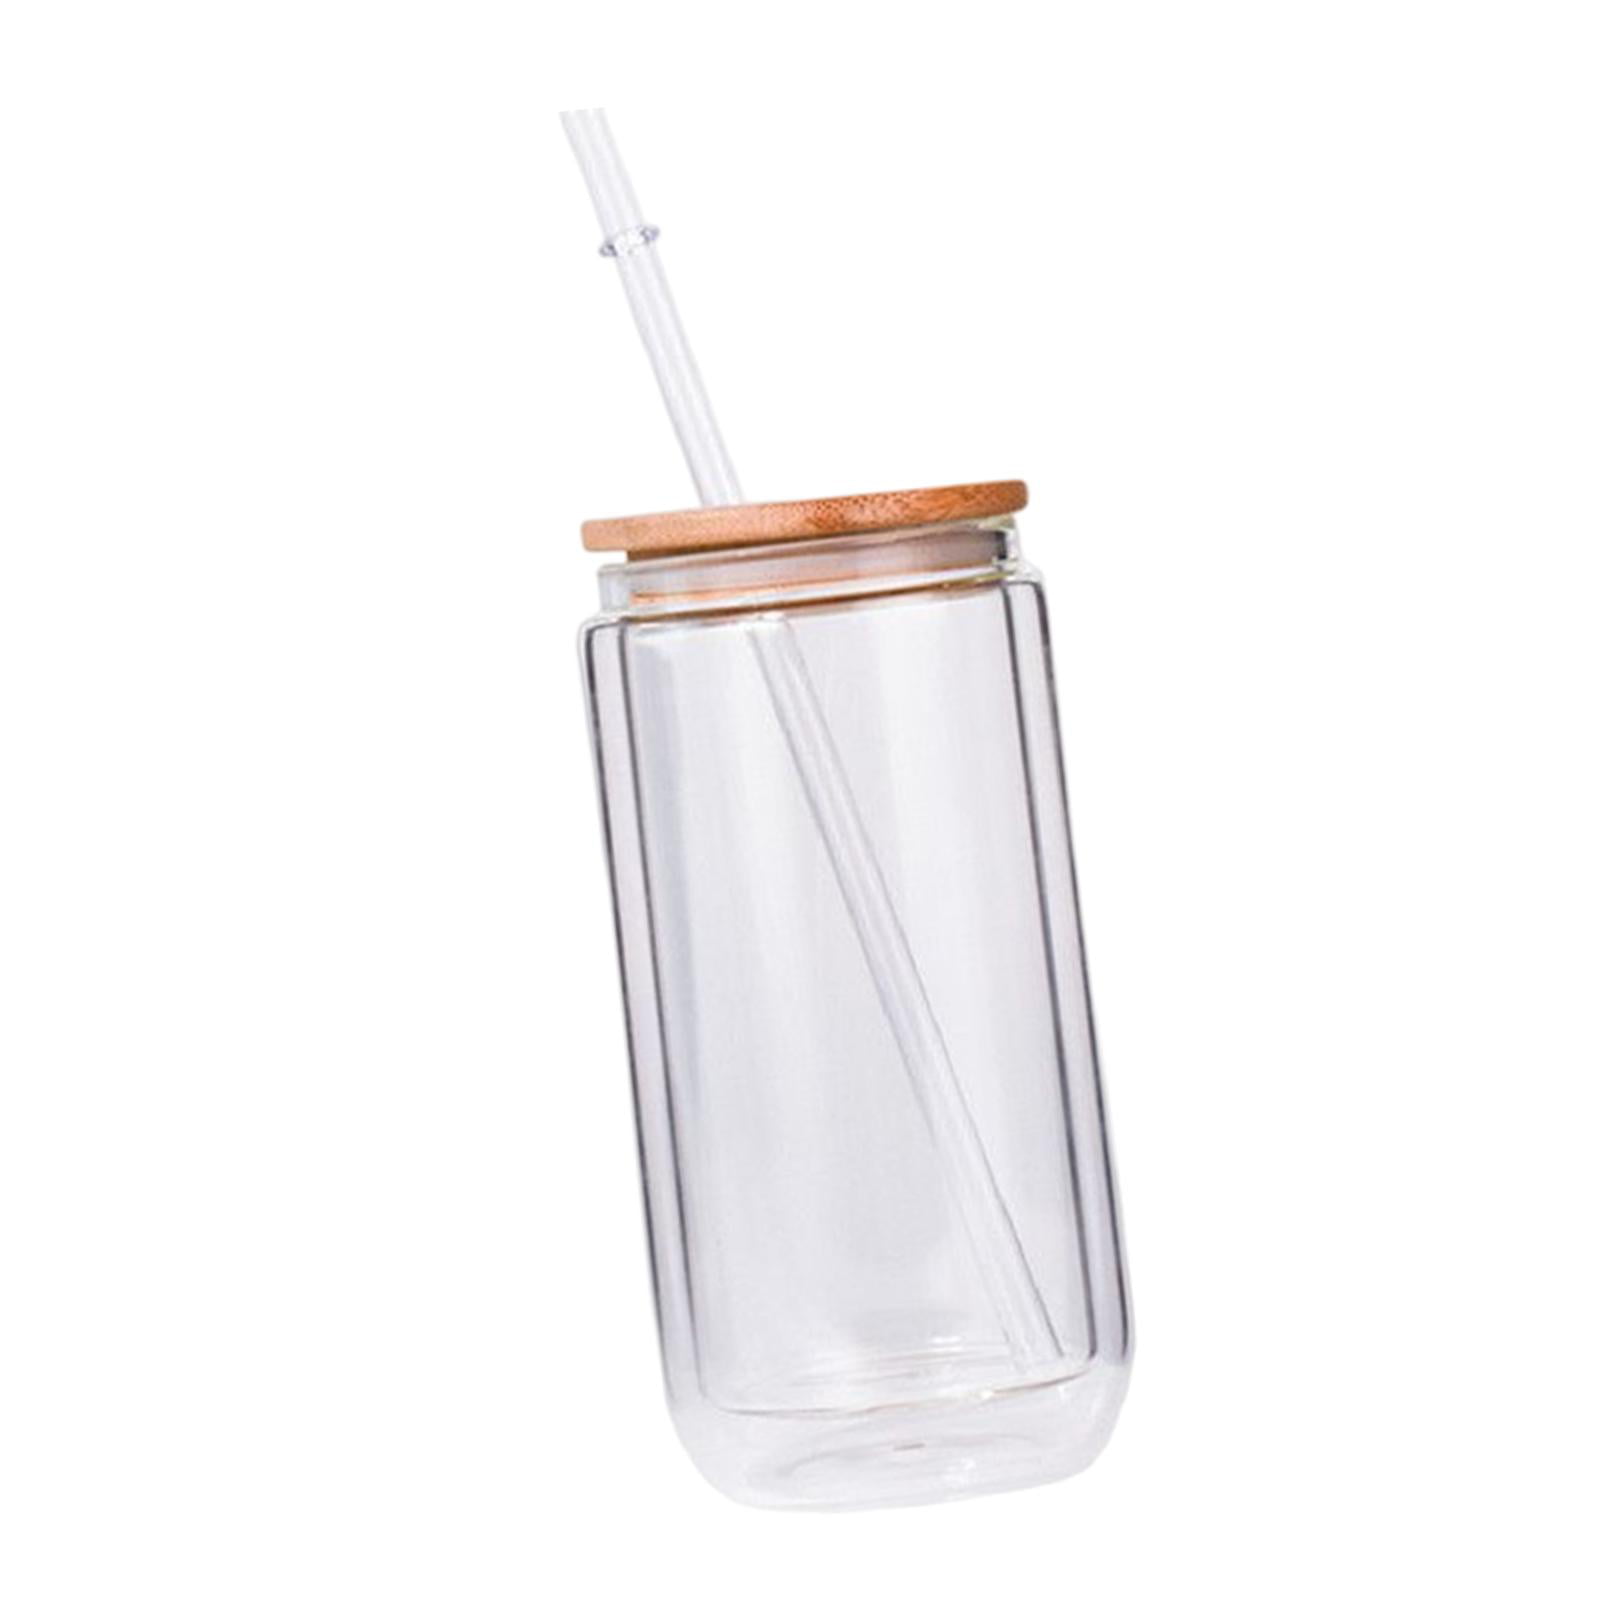 Fullstar fullstar glass cups with lids and straws - drinking glasses, glass  tumbler with straw and lid, iced coffee cups, glass coffee